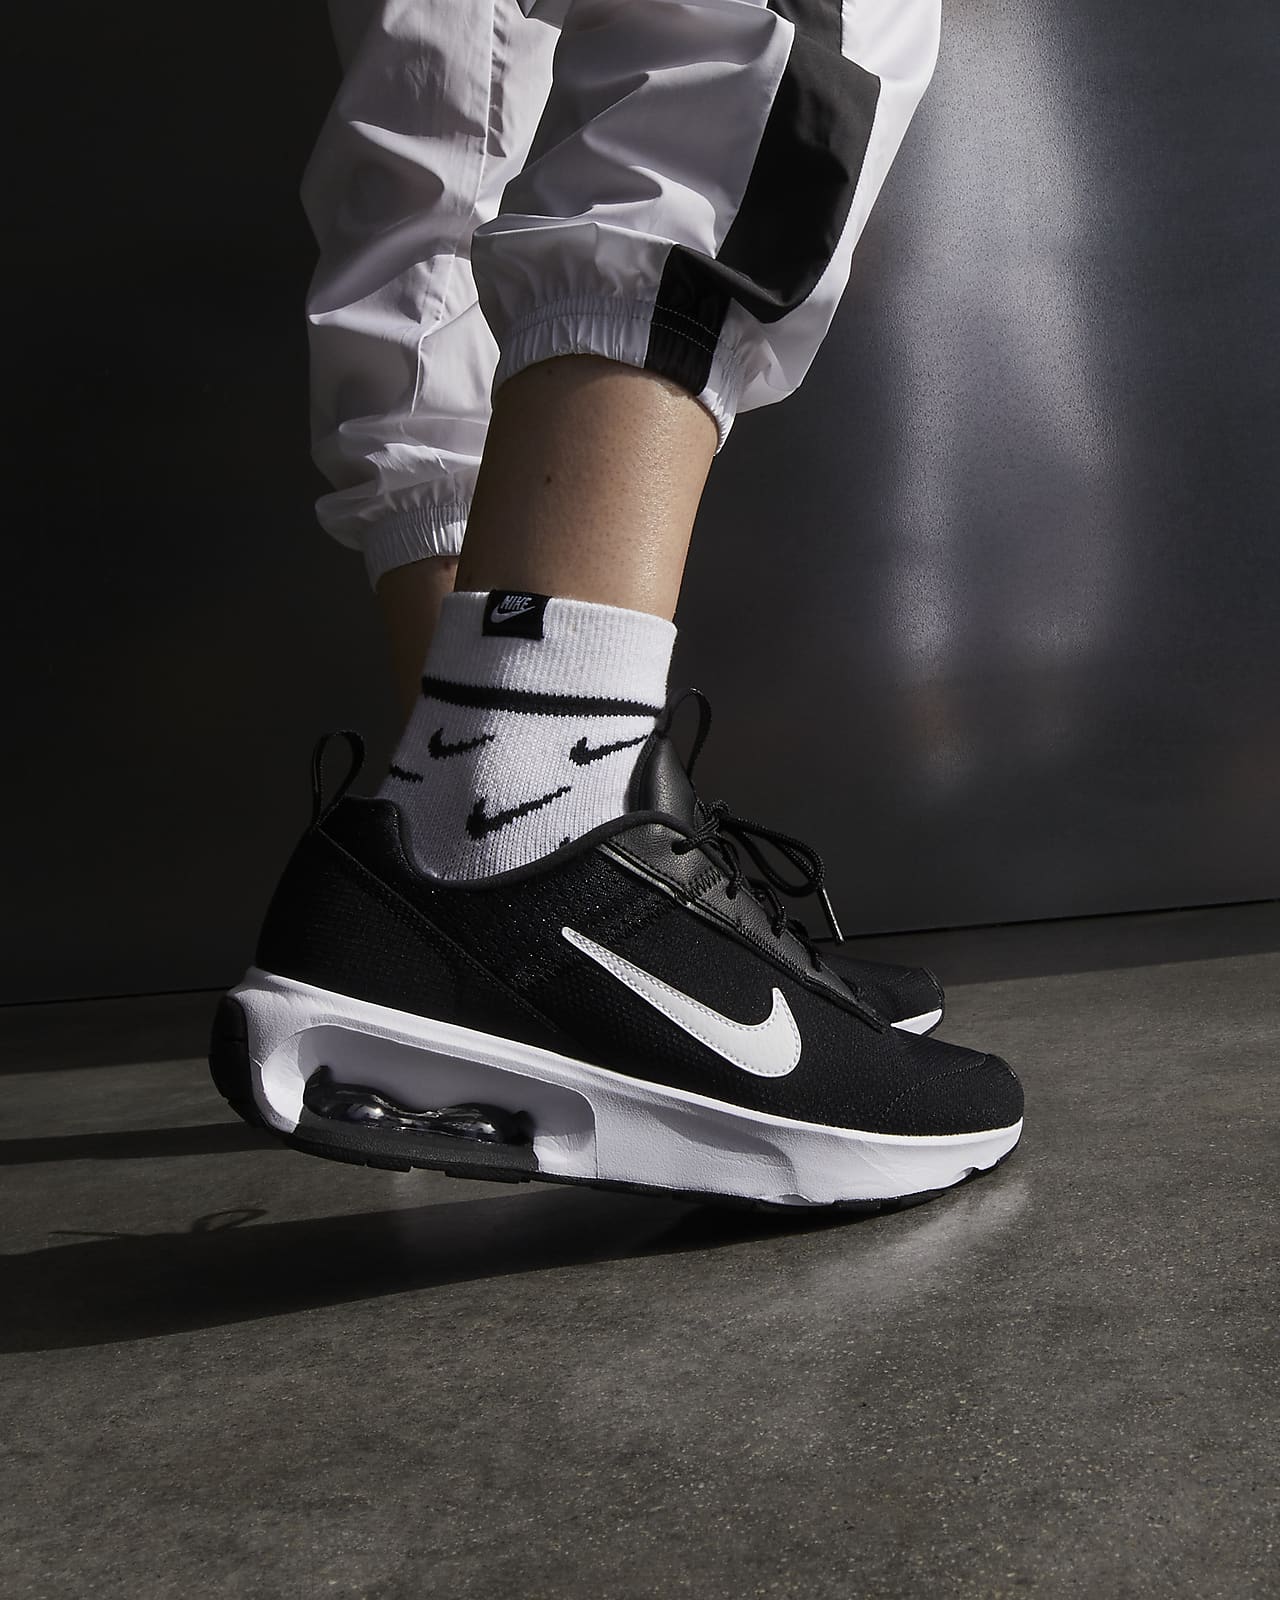 To separate Father Cloudy Nike Air Max INTRLK Lite Women's Shoes. Nike.com